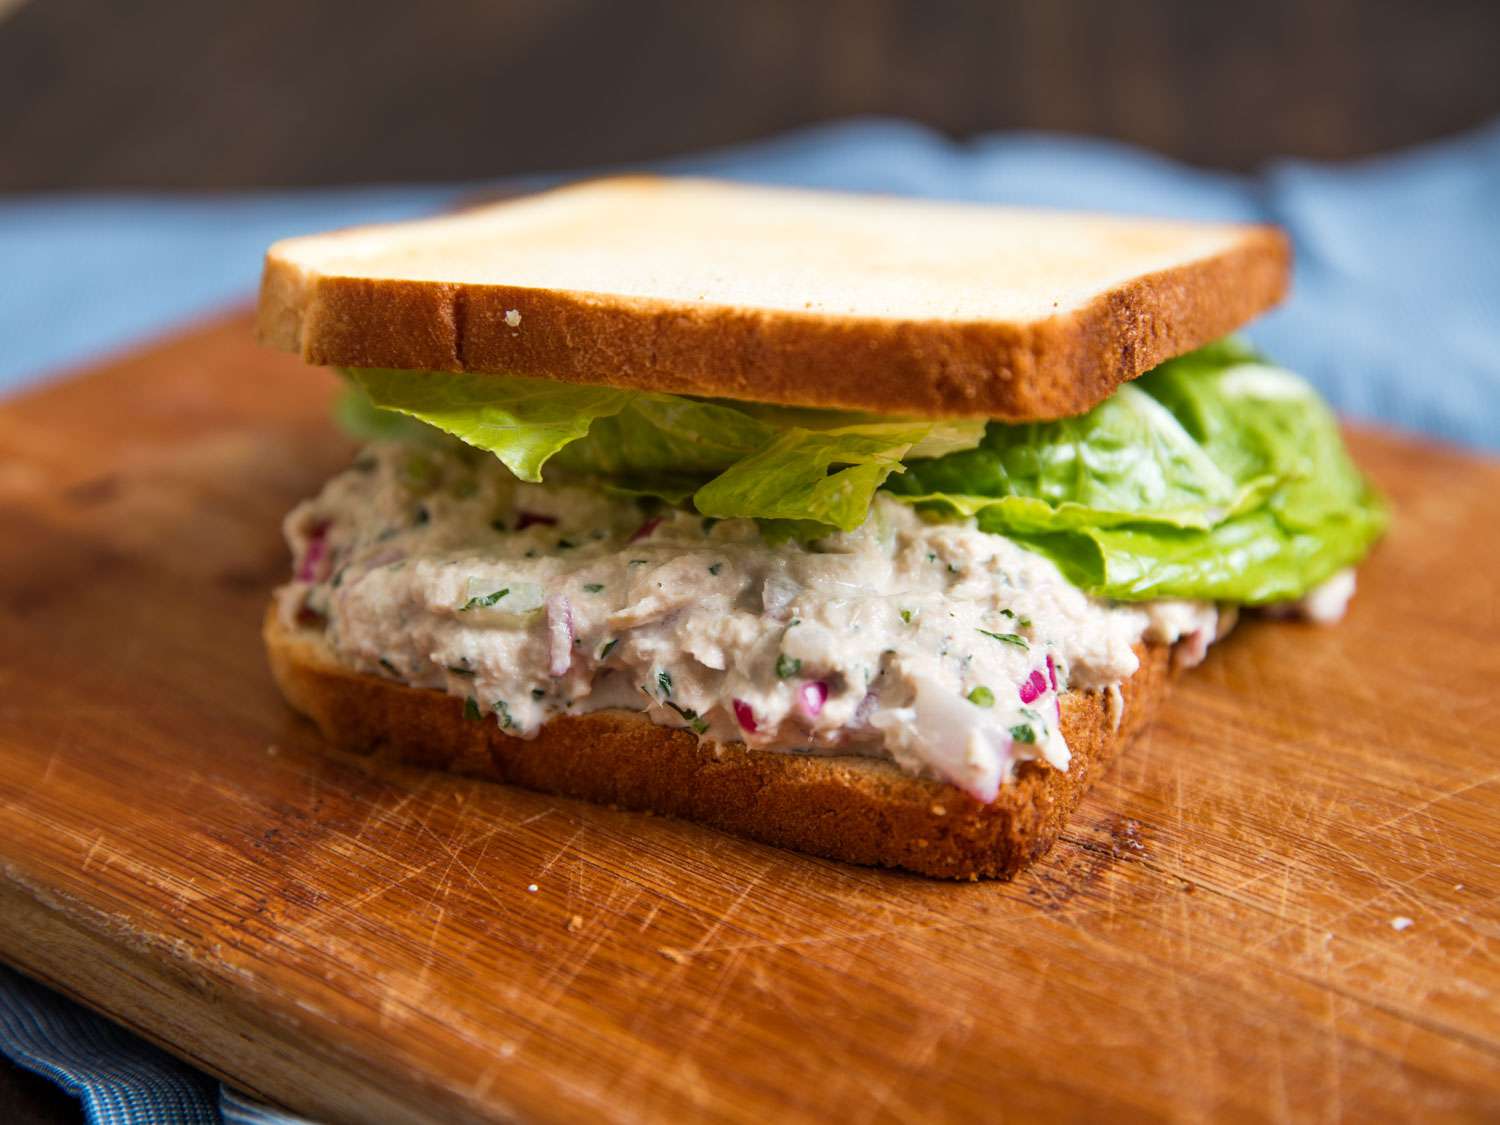 Close-up of a tuna salad sandwich, made with toasted white bread and lettuce.